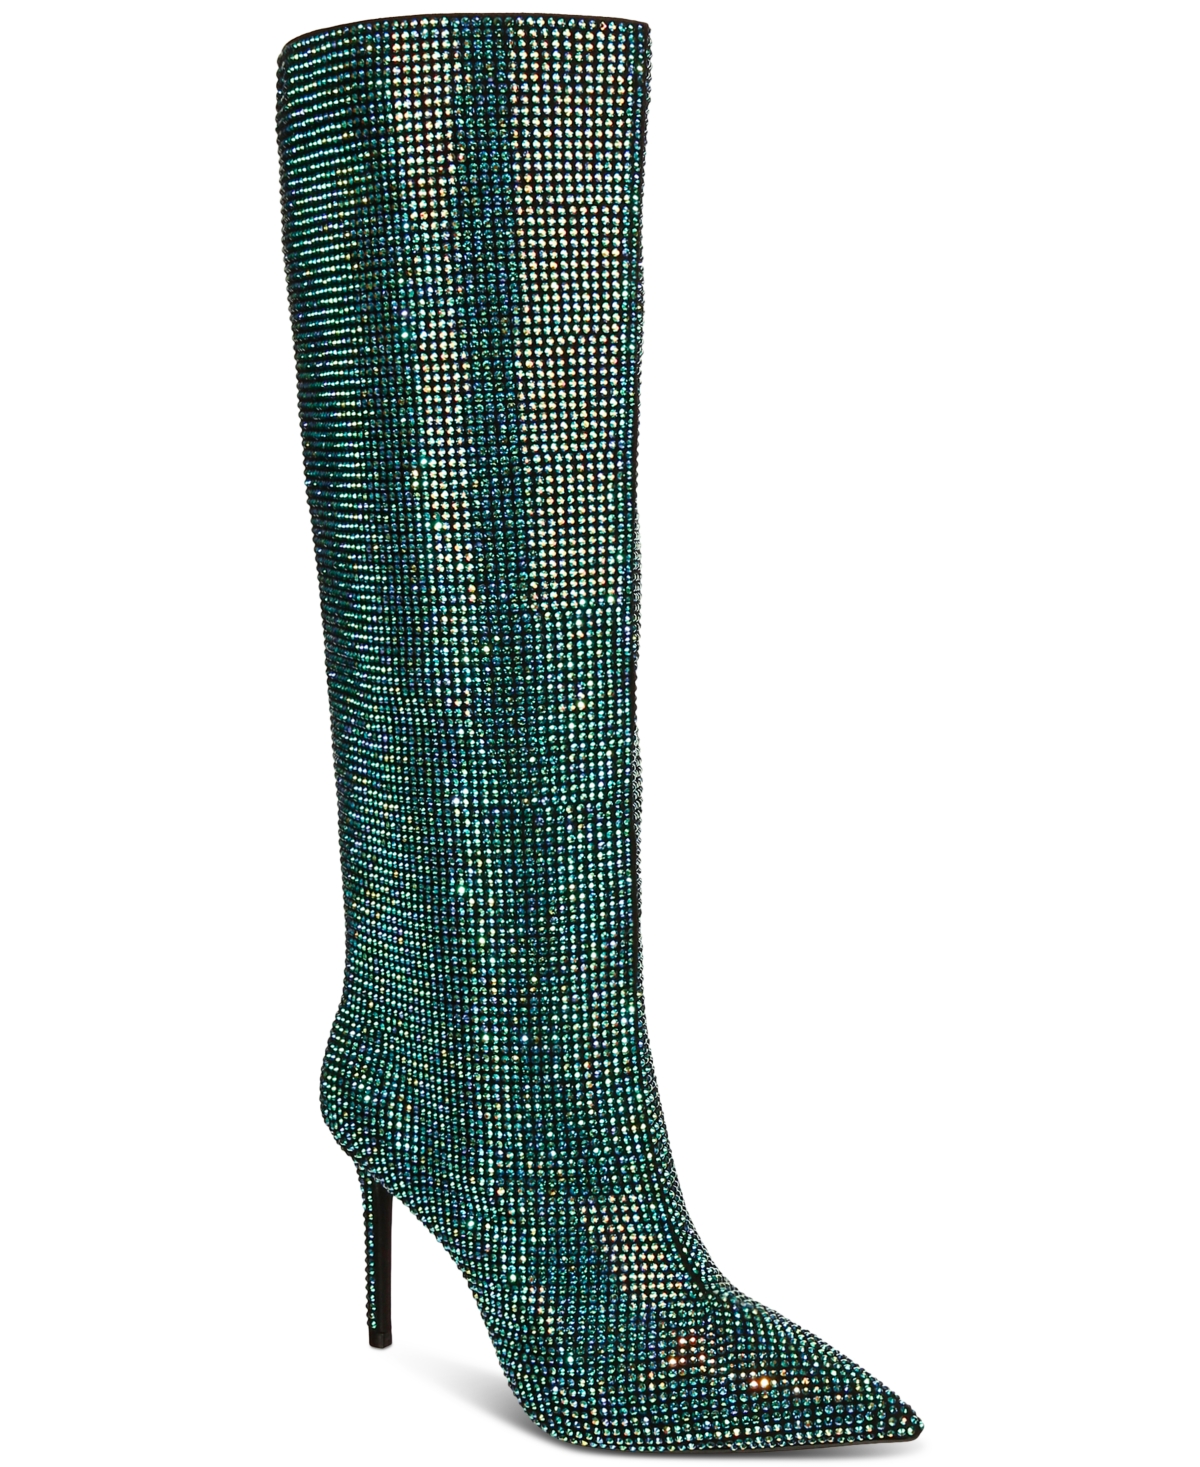 Havannah Knee High Stovepipe Dress Boots, Created for Macy's - Black Ab Bling